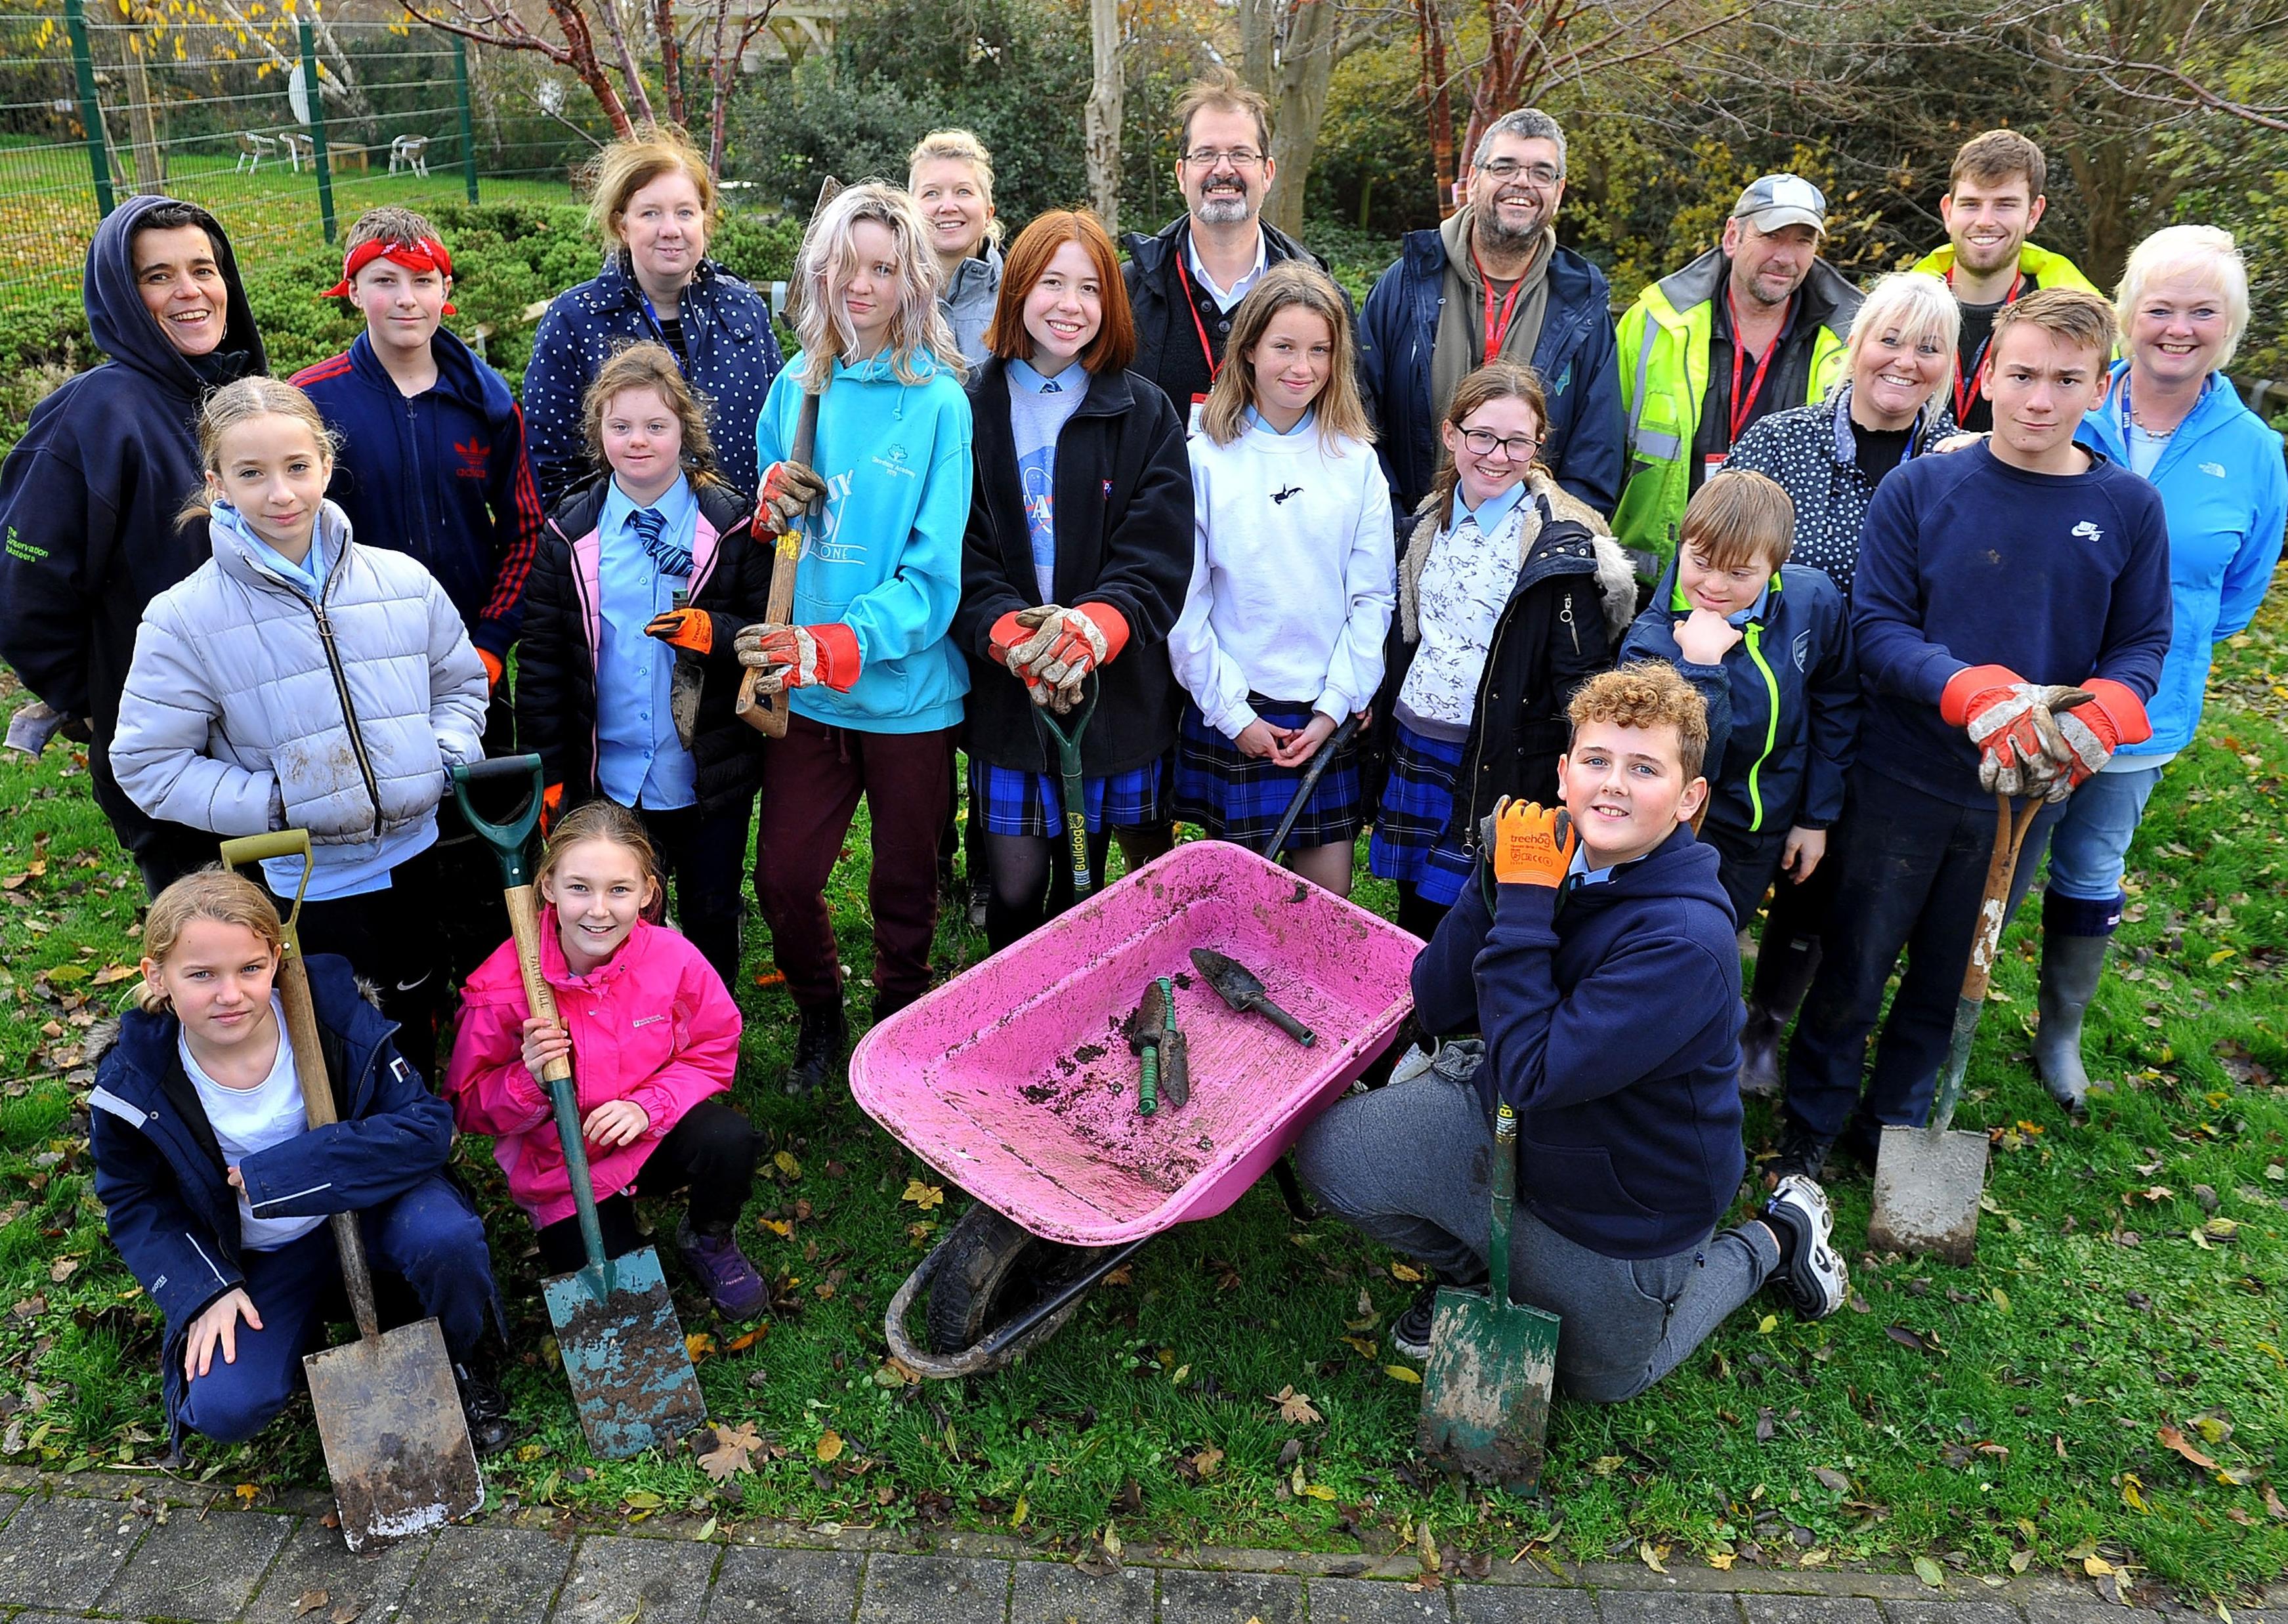 Shoreham Academy students spent the day planting trees